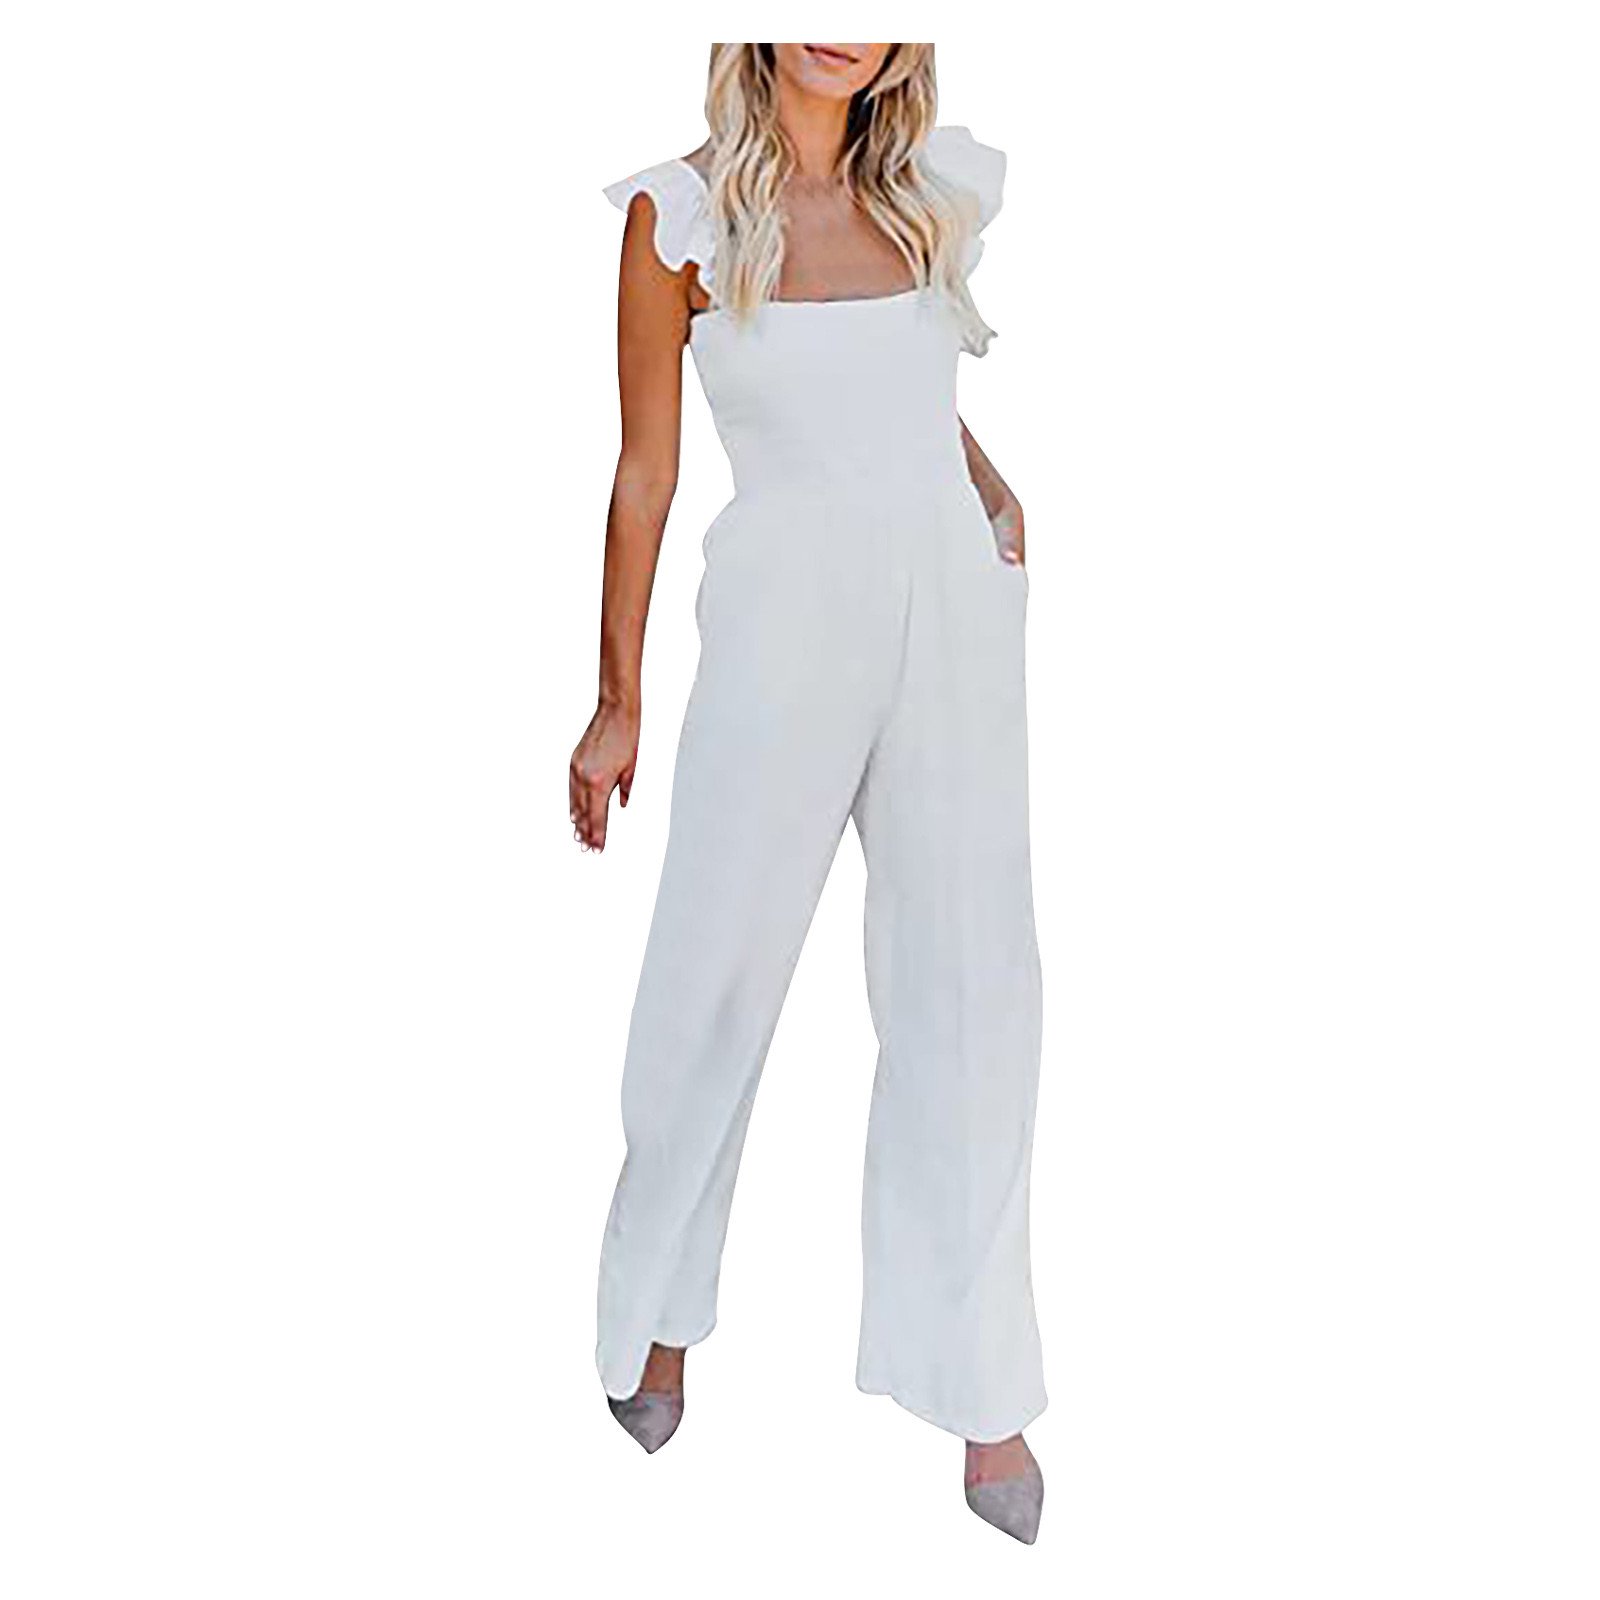 Aueoeo Festival Outfits for Women, Women's Casual Spaghetti Strap One Piece  Jumpsuits Solid Color Comfortable Baggy Overalls Wide Leg Pants Rompers -  Walmart.com